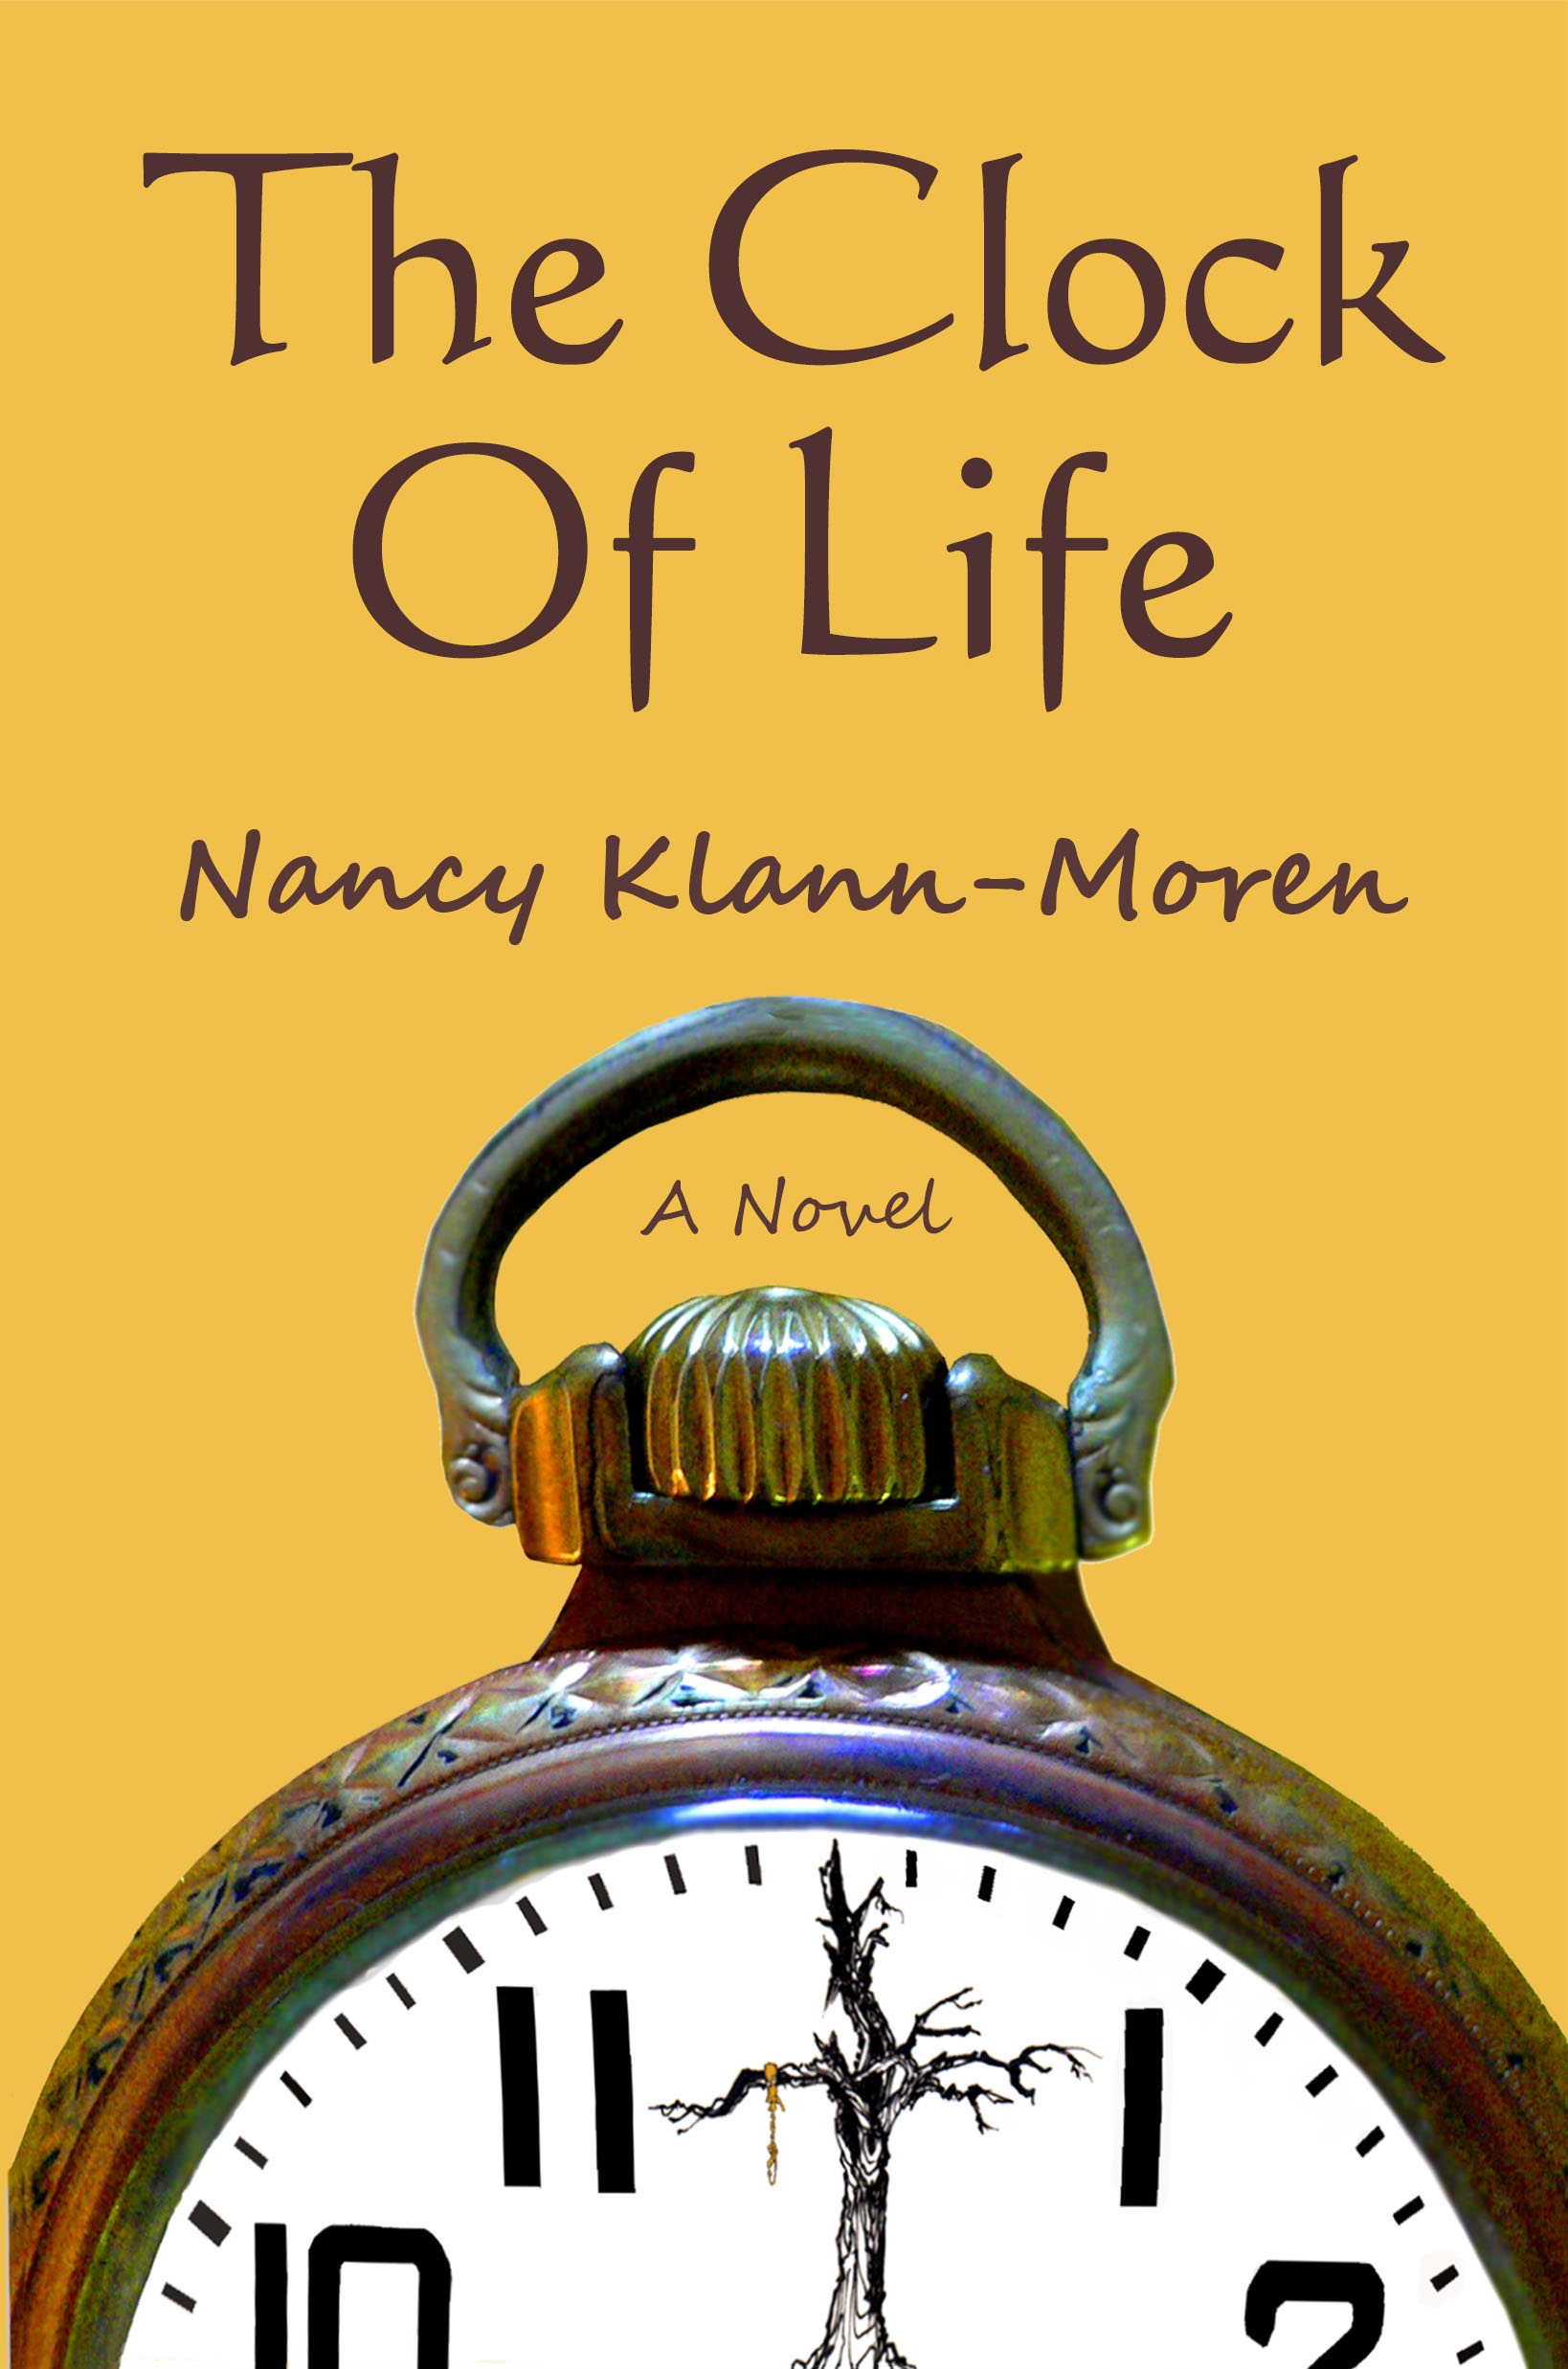 The-Clock-of-Life-Book-Jacket-front-Nov-2016